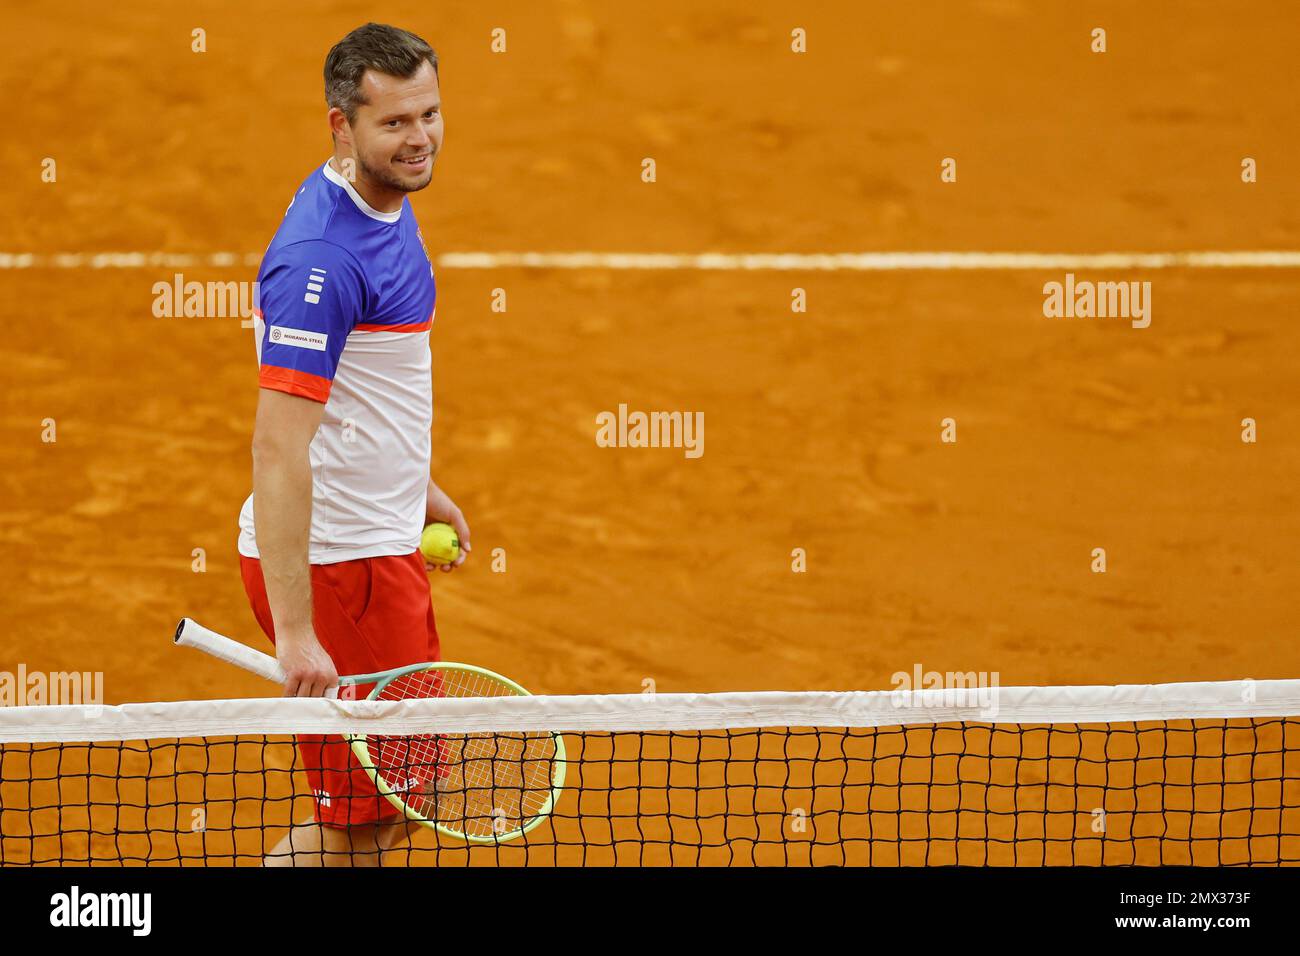 Tennis player Adam Pavlasek of Czech team in action during the training  session prior to the Davis Cup tennis tournament qualification against  Portuga Stock Photo - Alamy